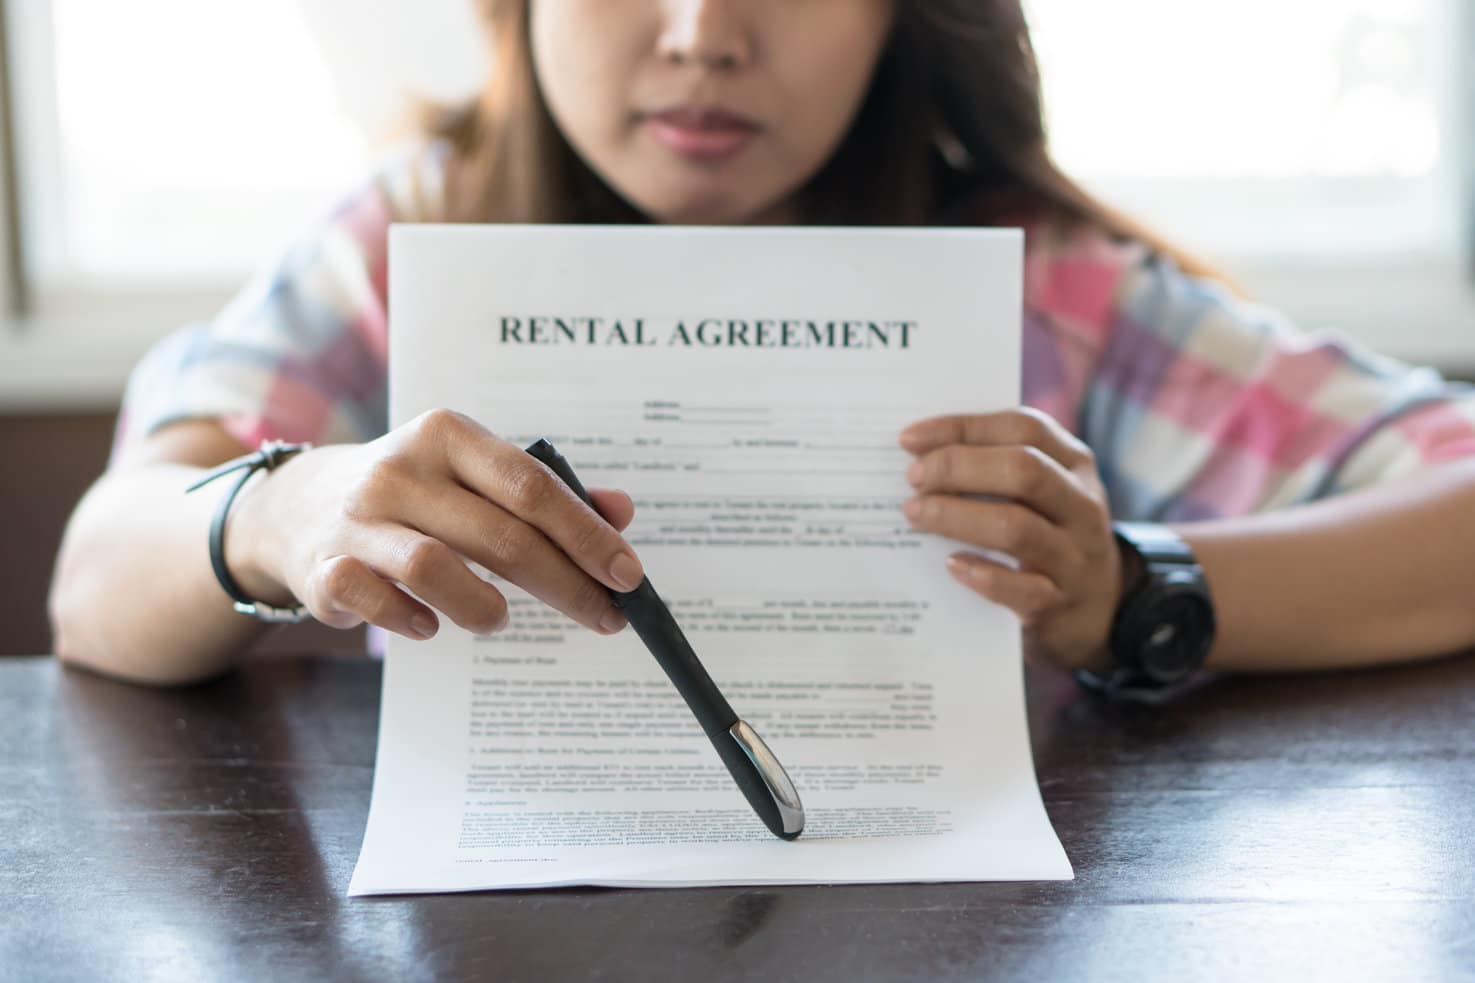 Eviction rights depend on your tenancy agreement